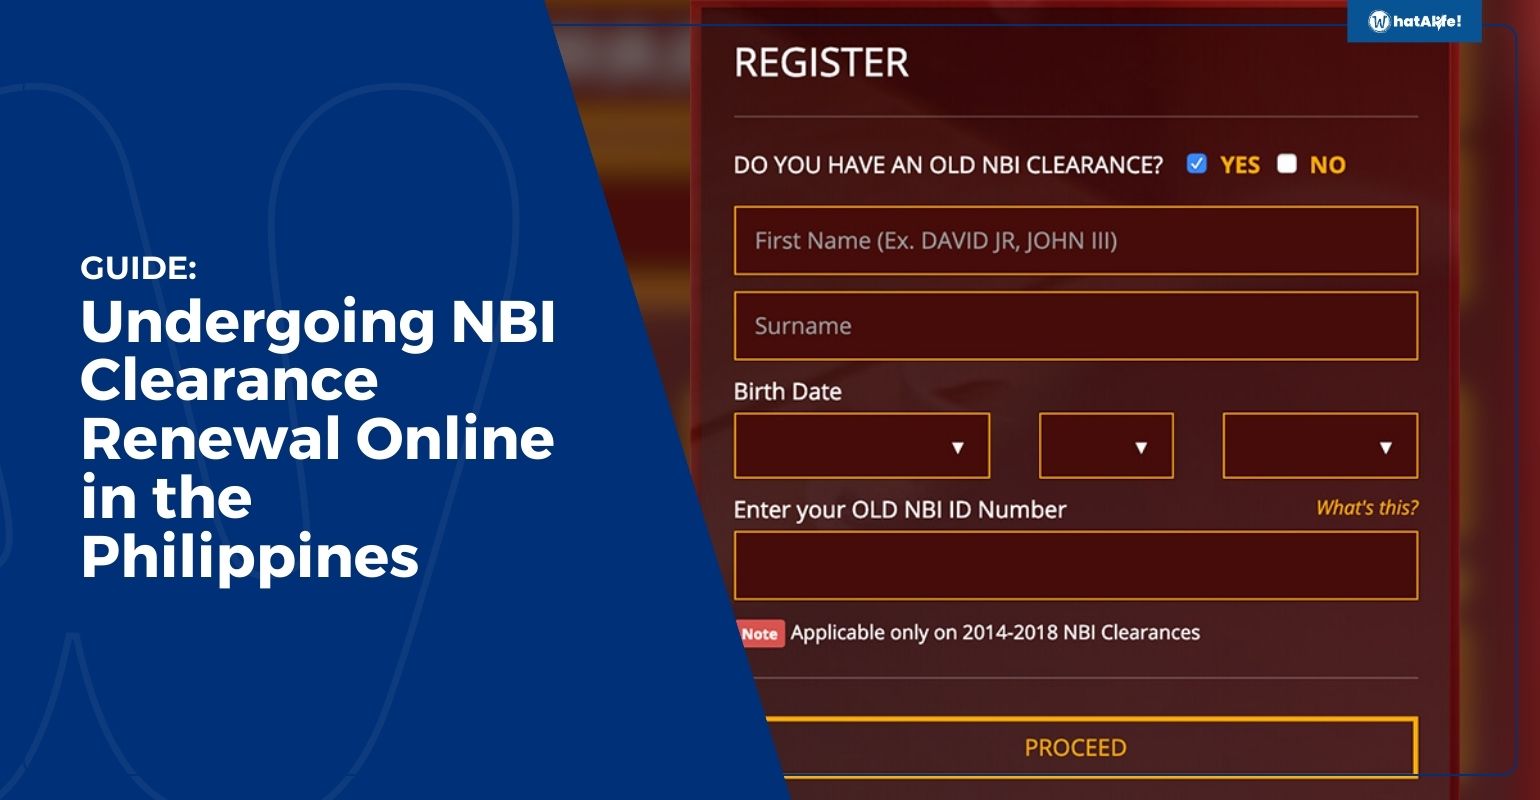 GUIDE: Undergoing NBI Clearance Renewal Online in the Philippines